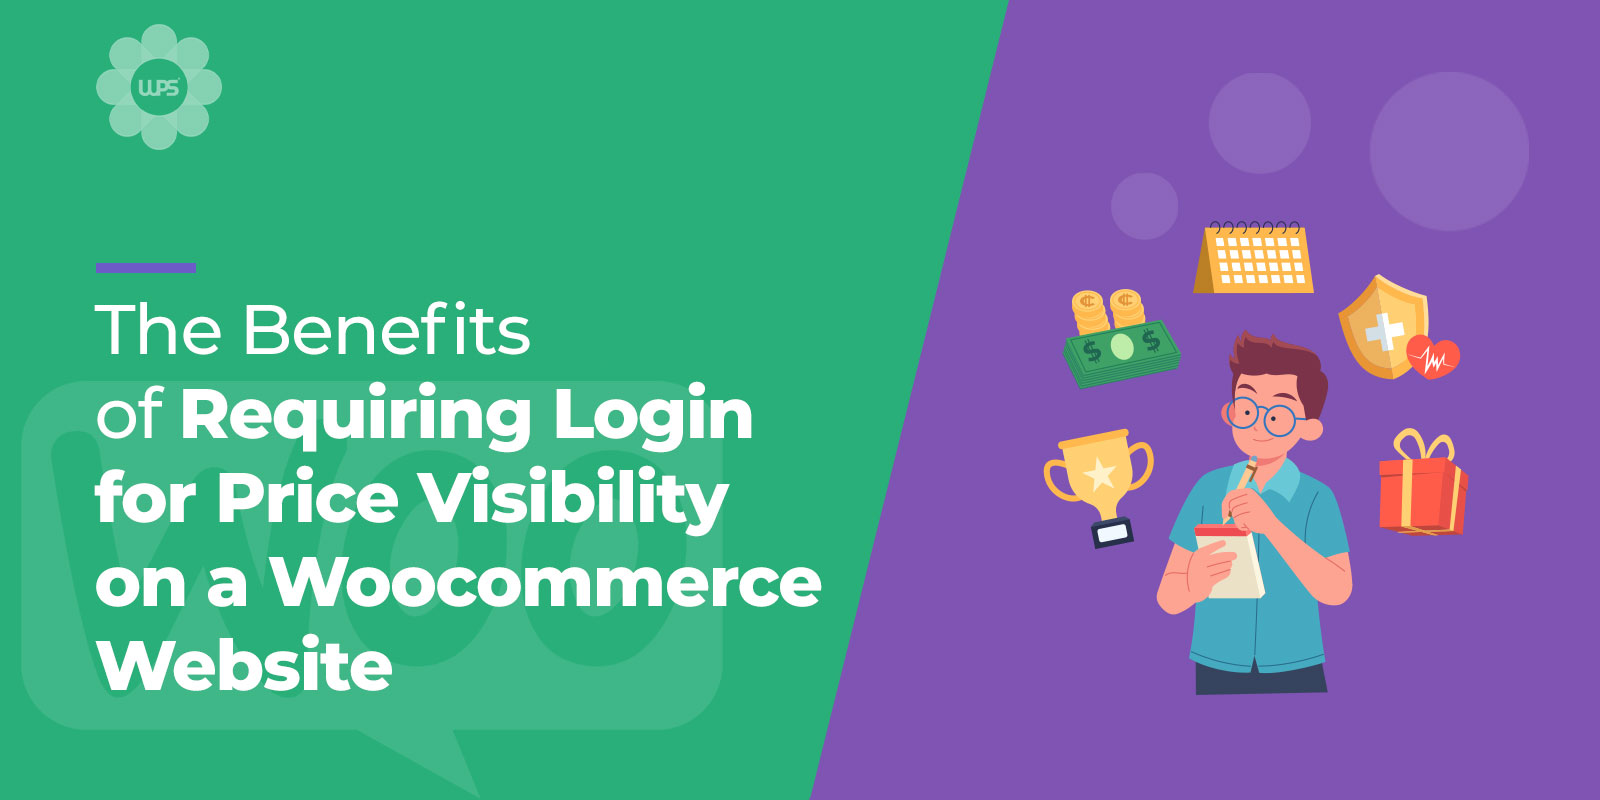 The-Benefits-of-Requiring-Login-for-Price-Visibility-on-a-WooCommerce-Website-2.0.